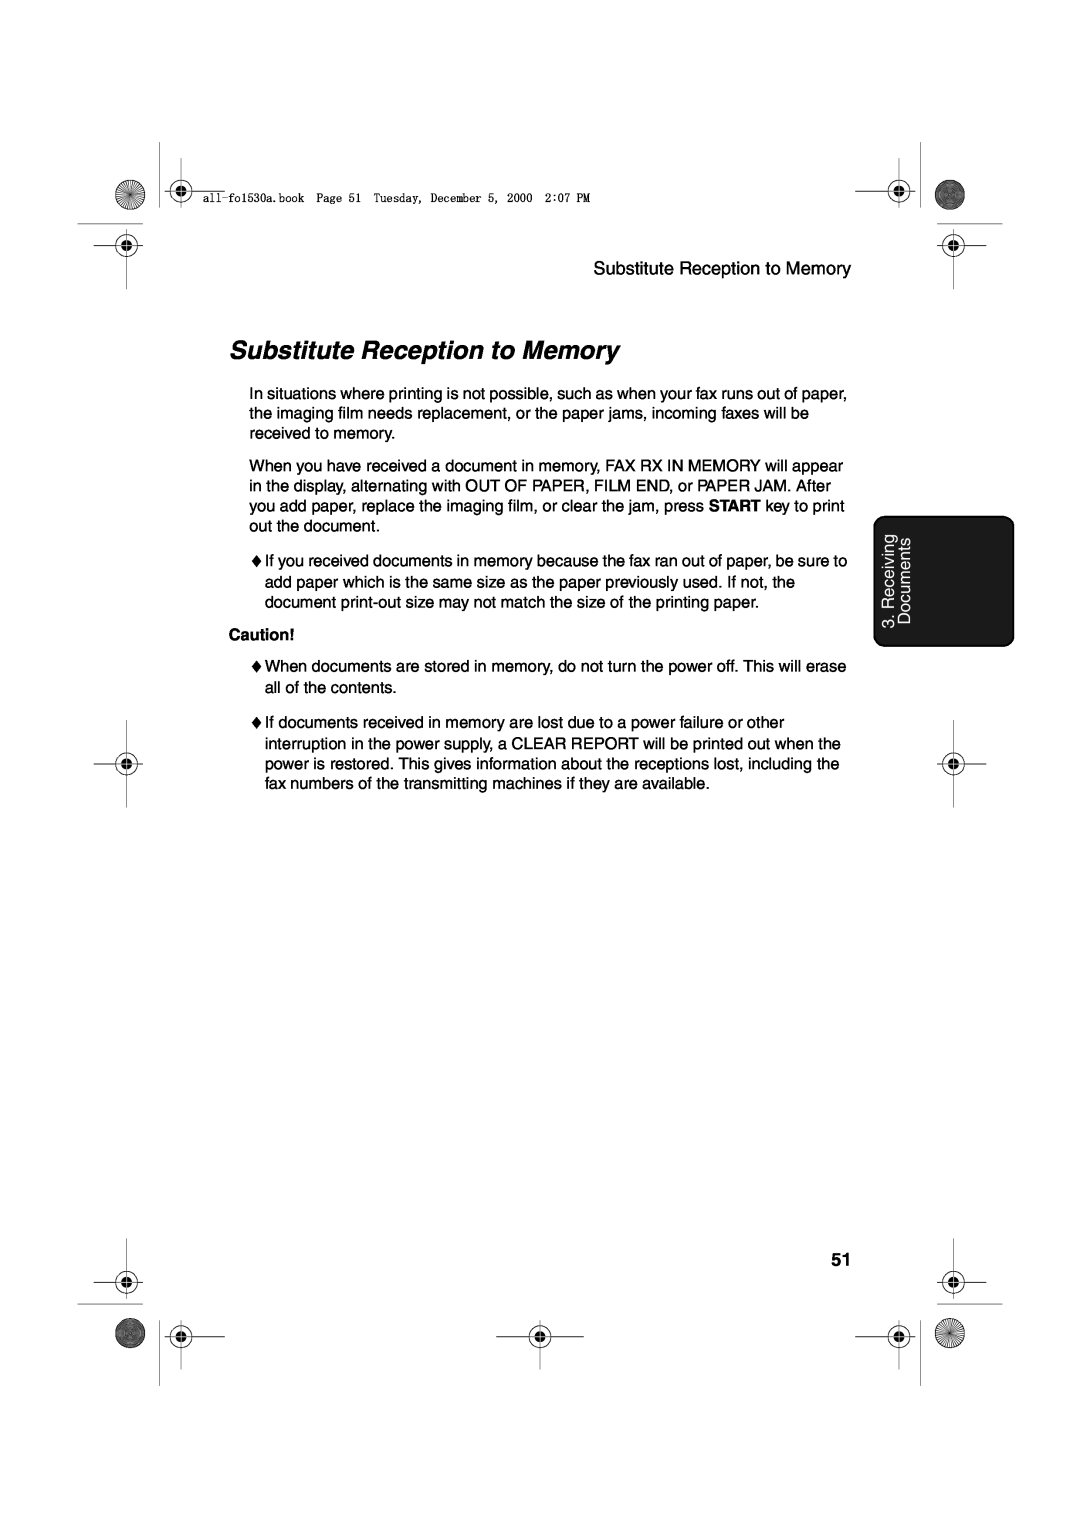 Sharp FO-1530 operation manual Substitute Reception to Memory, Receiving Documents 